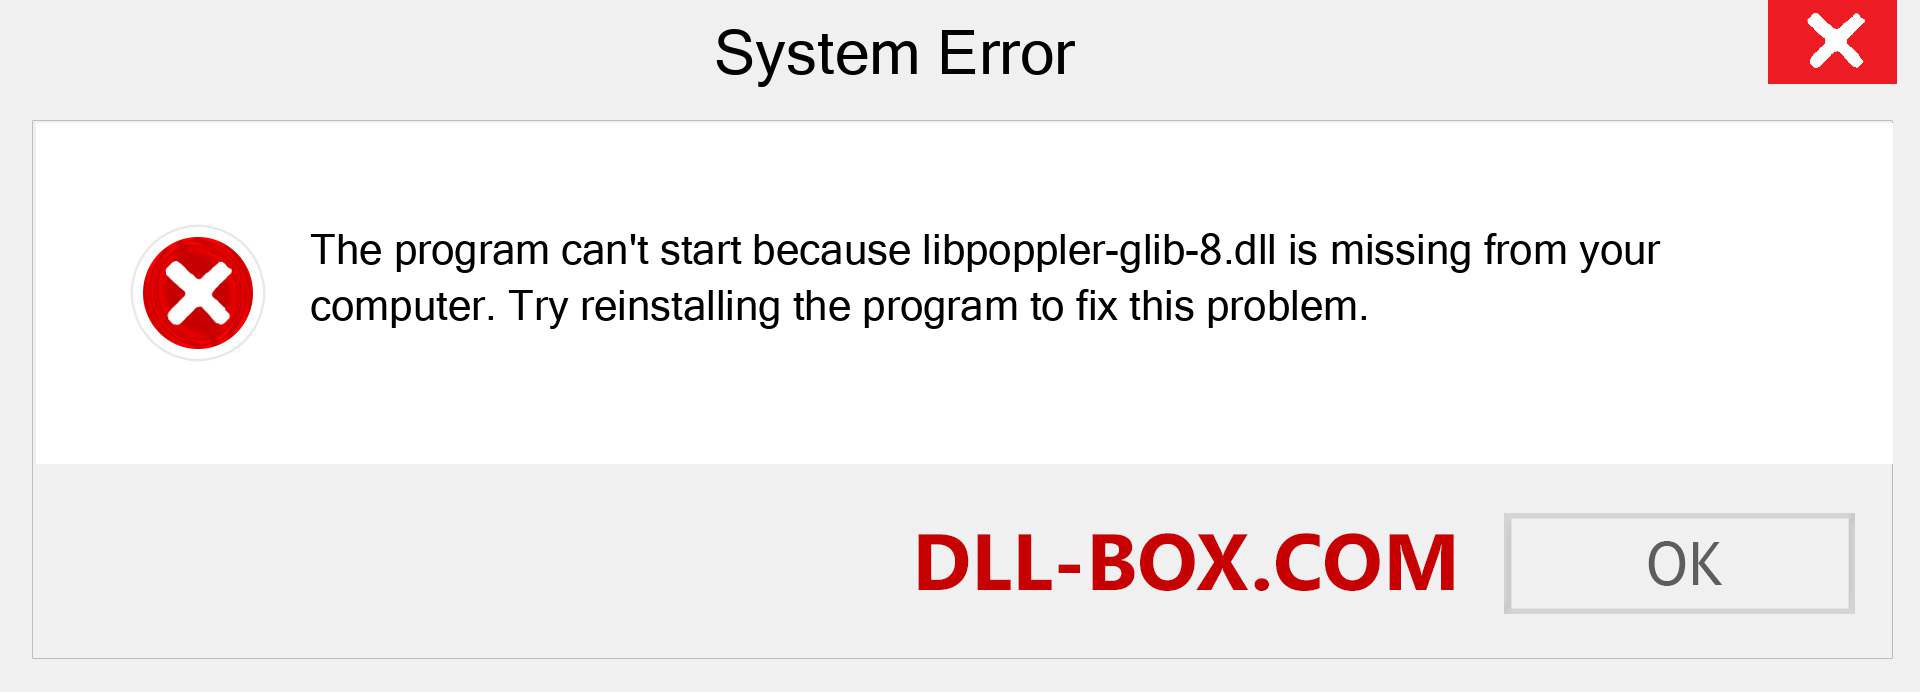  libpoppler-glib-8.dll file is missing?. Download for Windows 7, 8, 10 - Fix  libpoppler-glib-8 dll Missing Error on Windows, photos, images